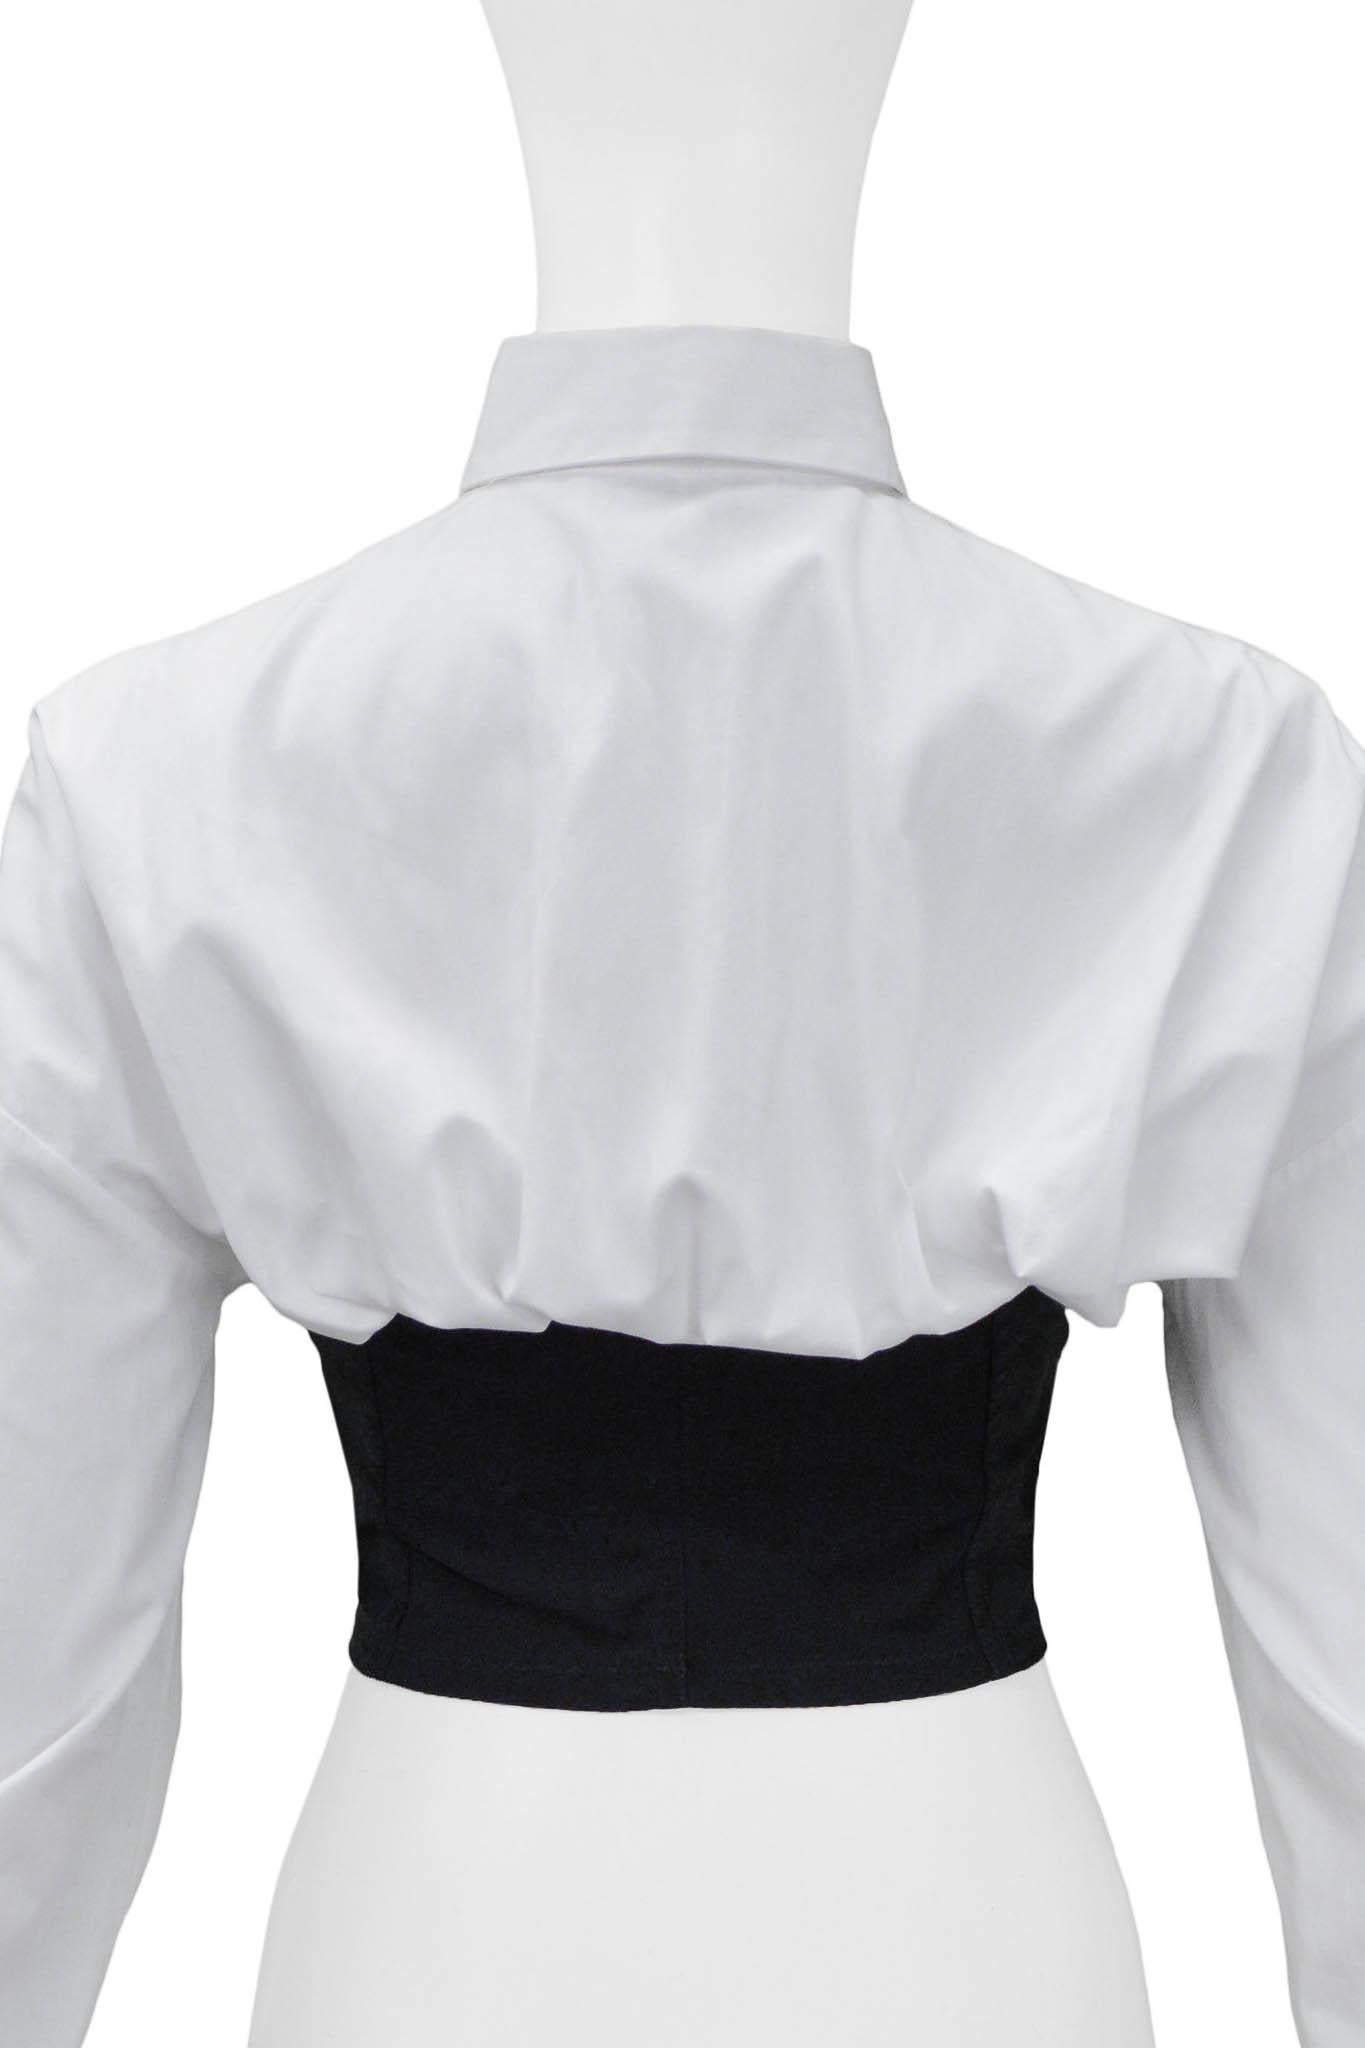 Dolce & Gabbana 1992 Black Satin Bustier With Attached White Shirt  1